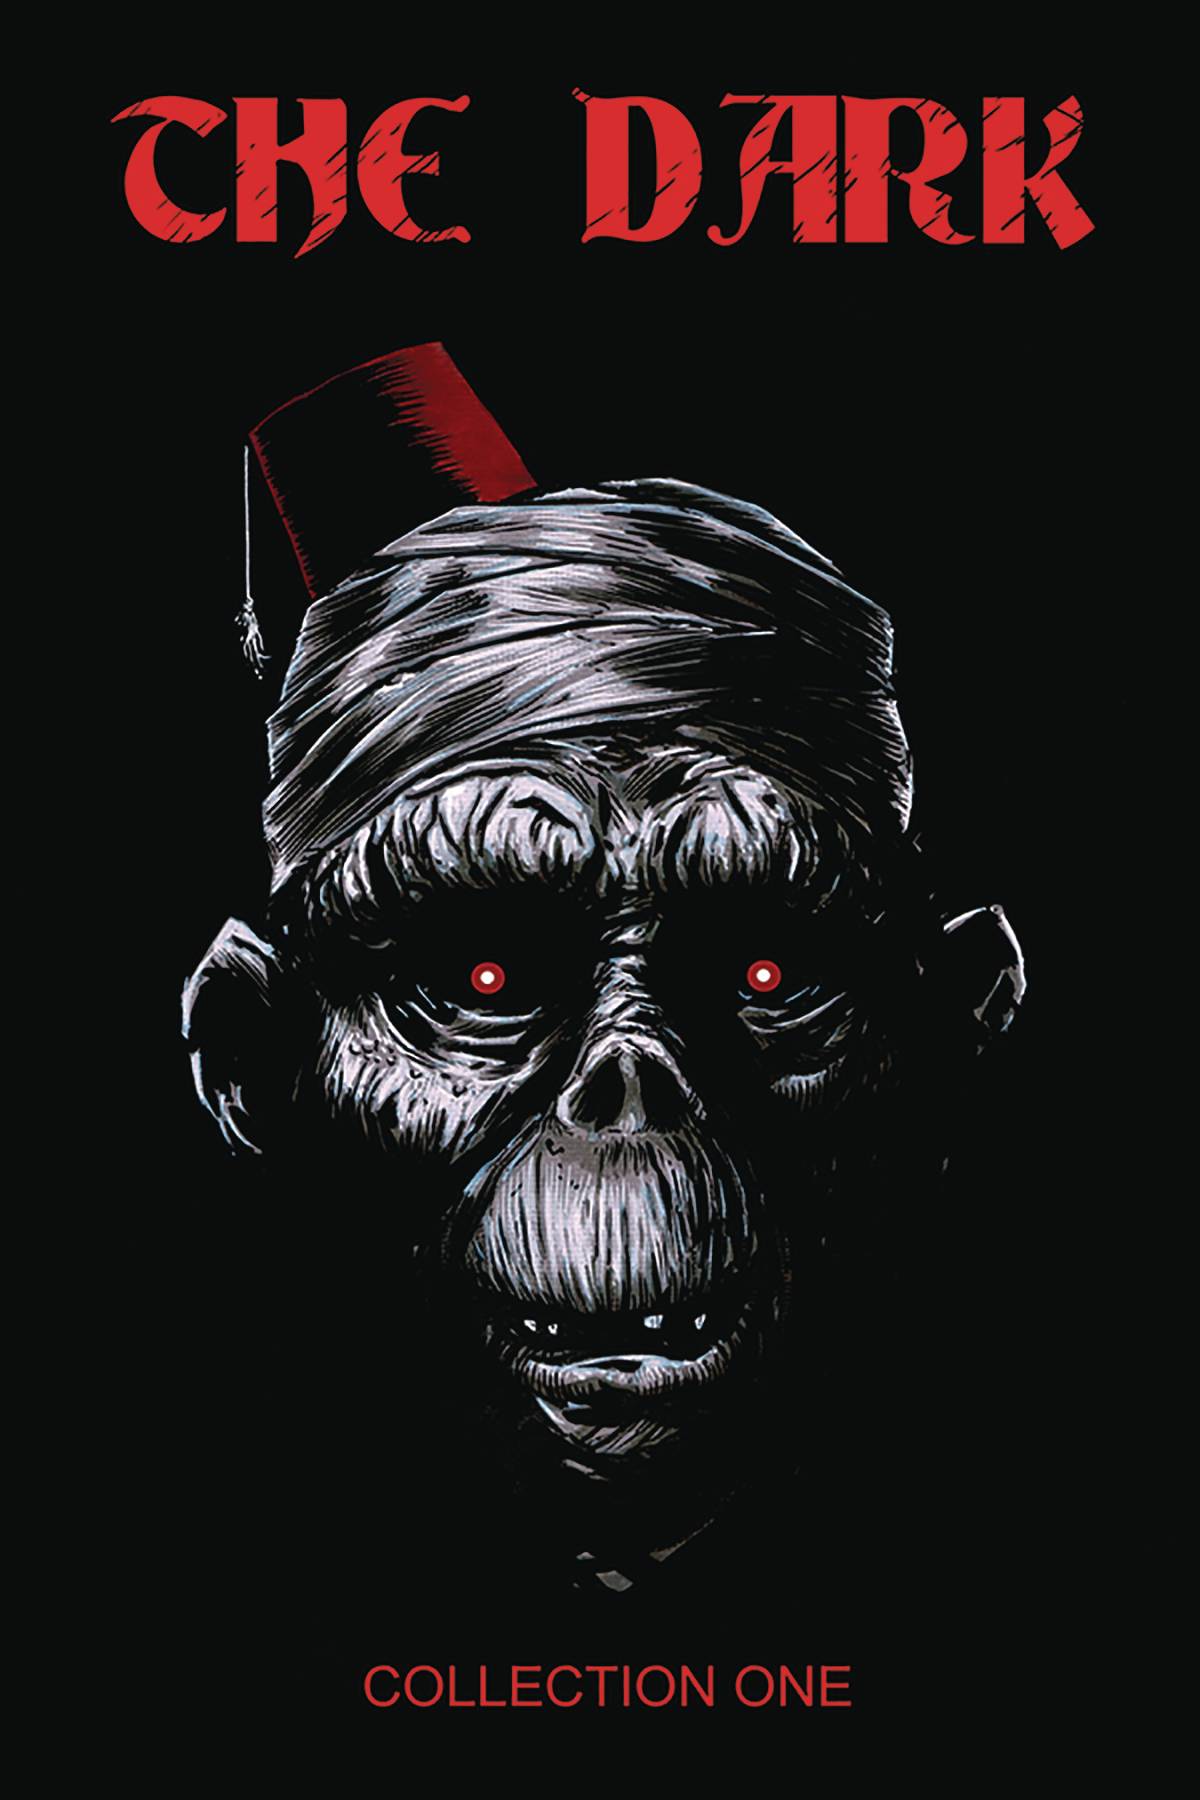 A wrinkled chimpanzee with sunken red eyes gazes out at the viewer, wearing a turban and fez. Aside from the fez and its eyes, everything is in black and white.